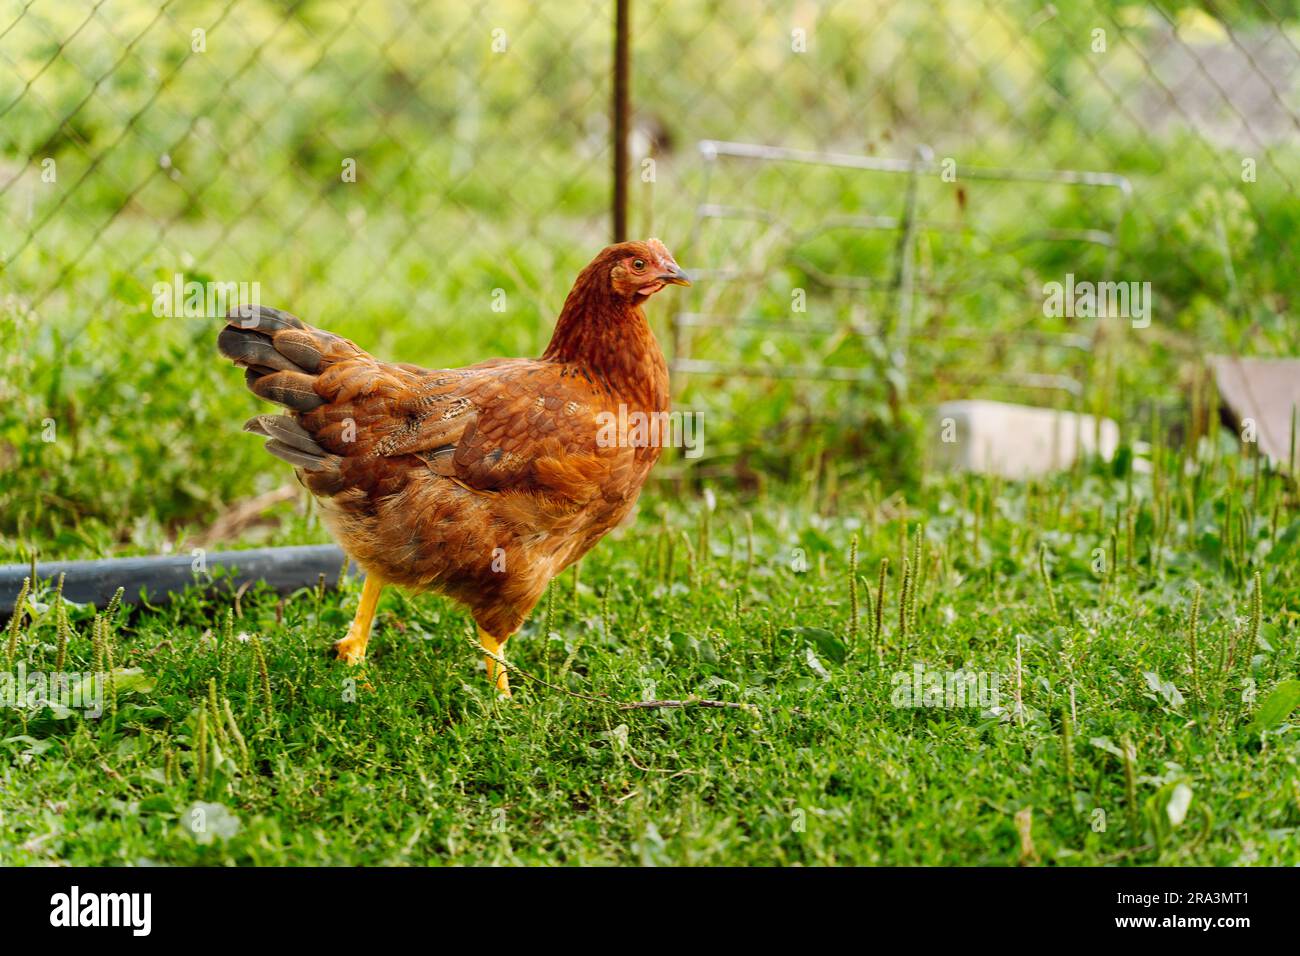 A red hen walks on the grass in a village yard Stock Photo